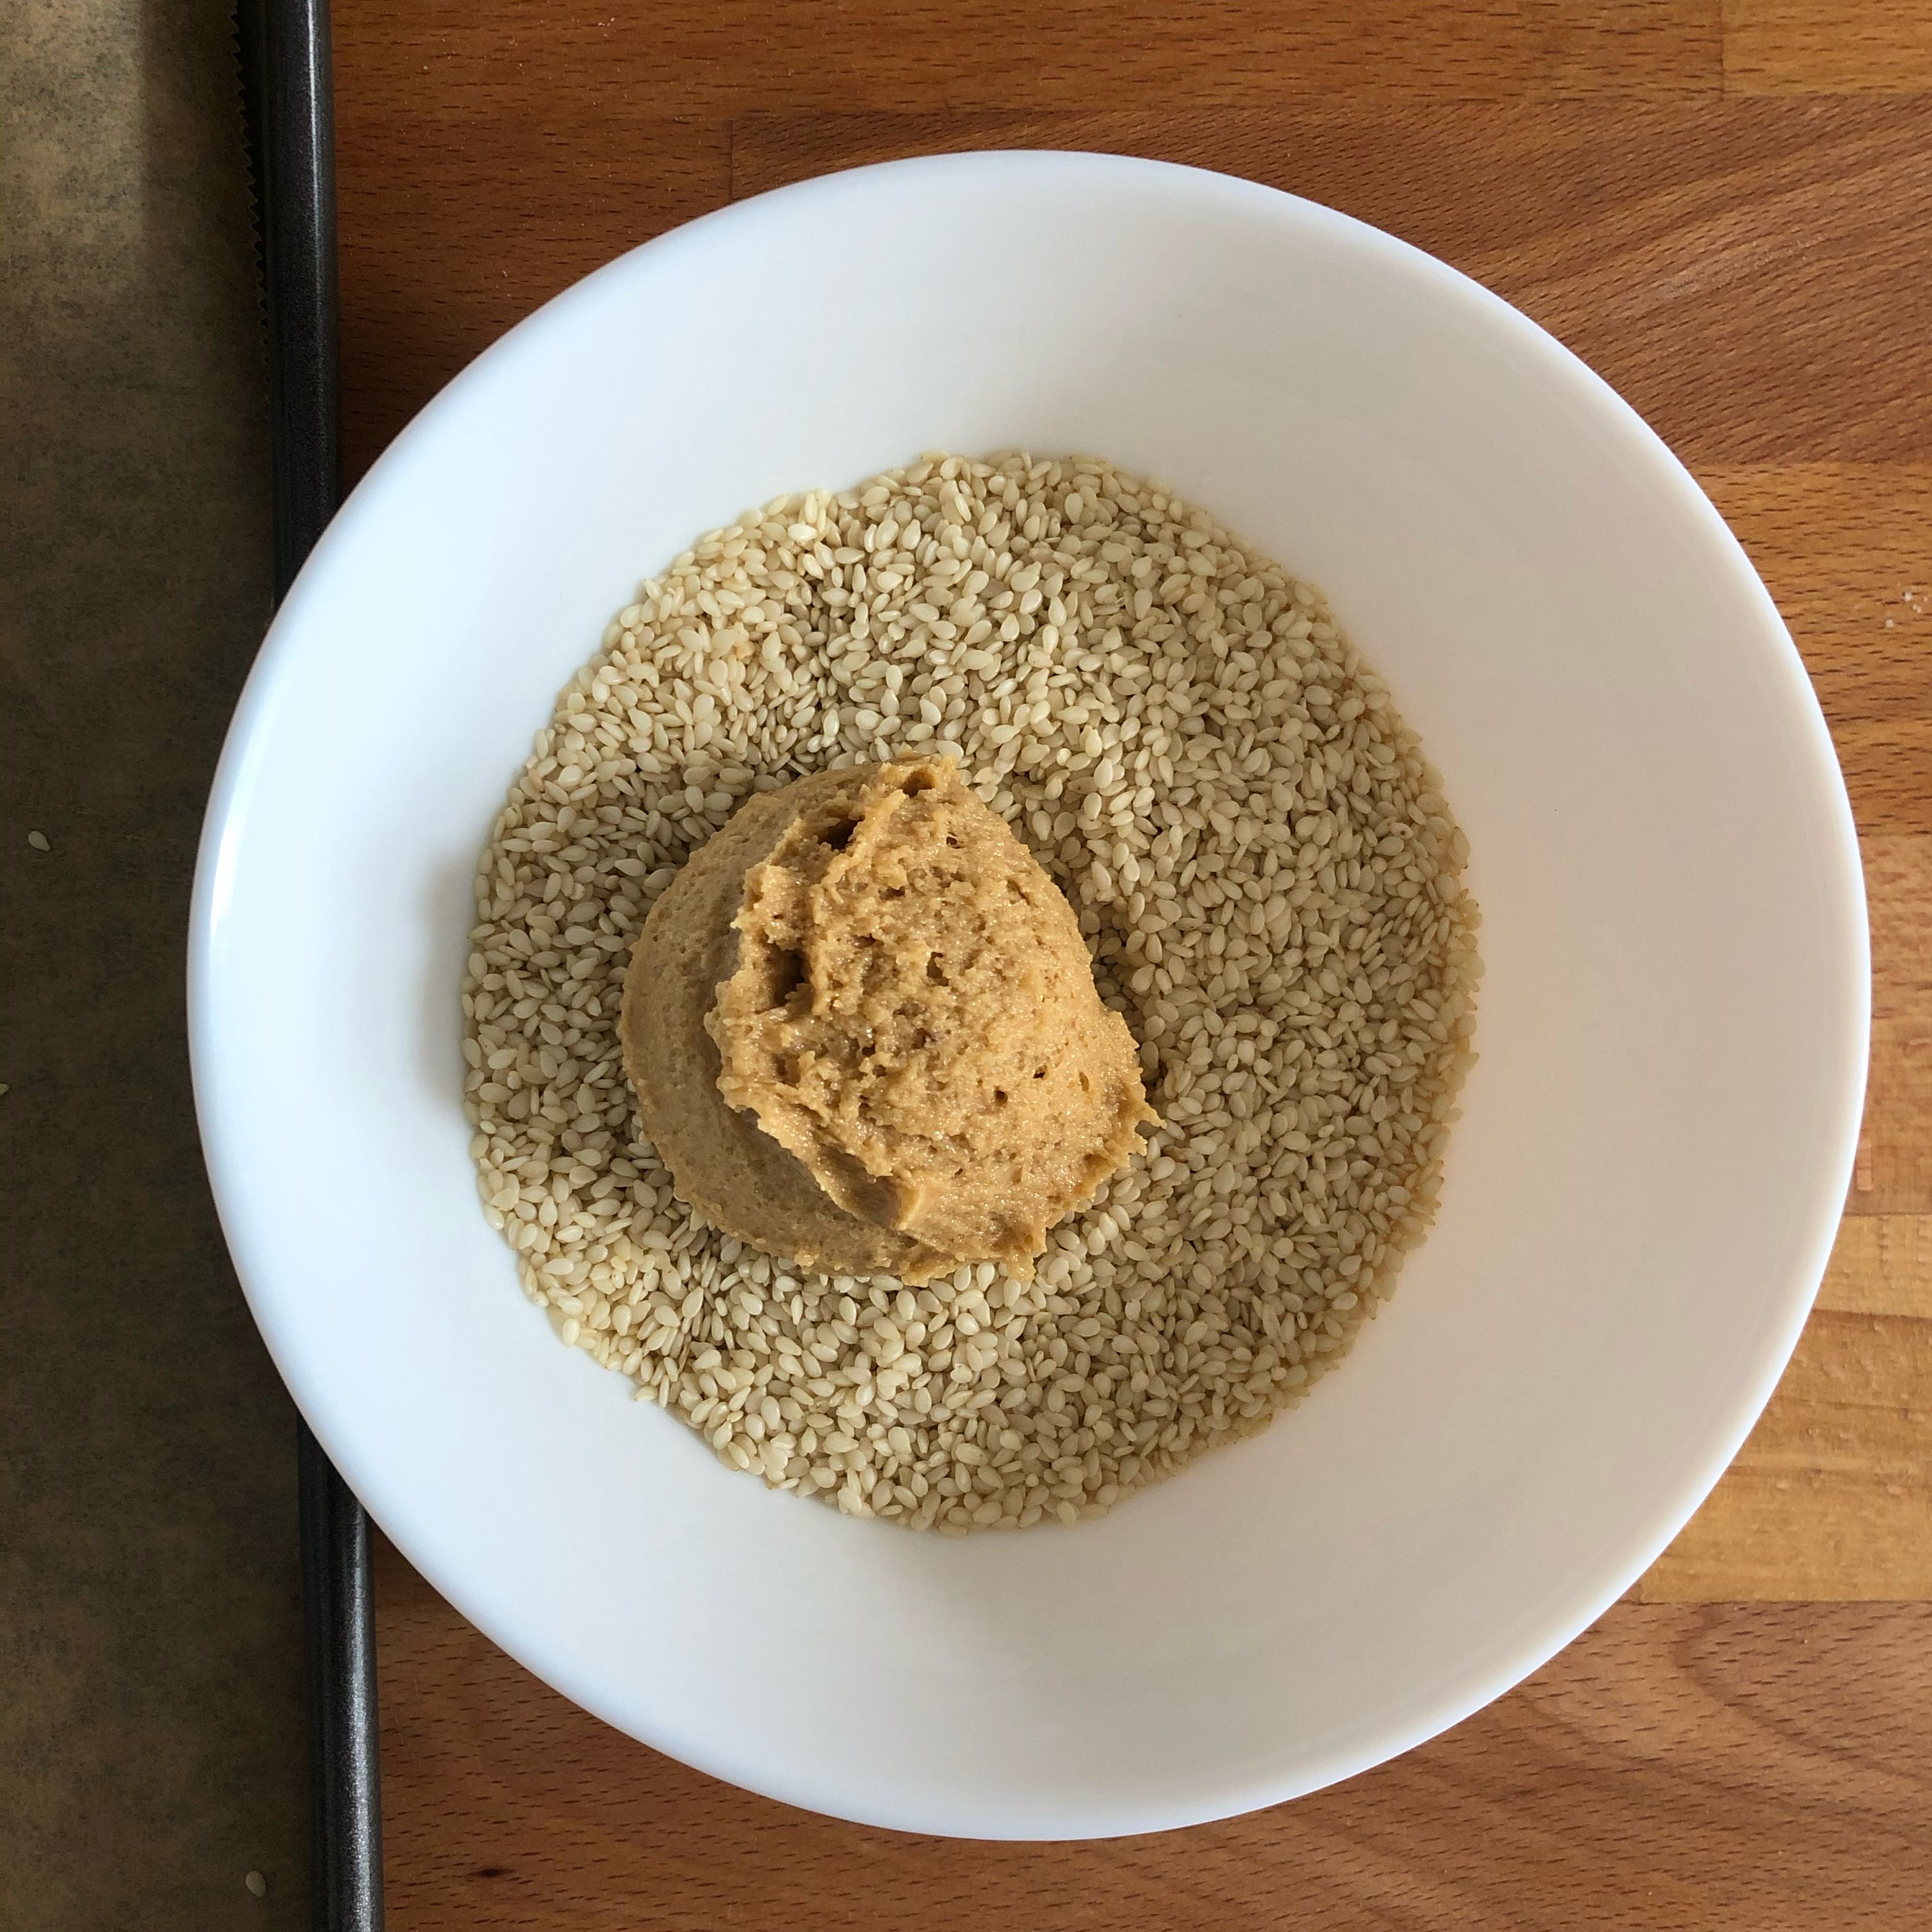 Add sesame seeds to a bowl. Use an ice cream scooper to scoop some of the cookie dough, then add to the bowl of sesame seeds and cover the ball. Transfer to a parchment-lined baking sheet. Repeat until all the cookie dough is gone, then cover the baking sheet with plastic wrap and chill dough for at least 2 hours, or overnight.